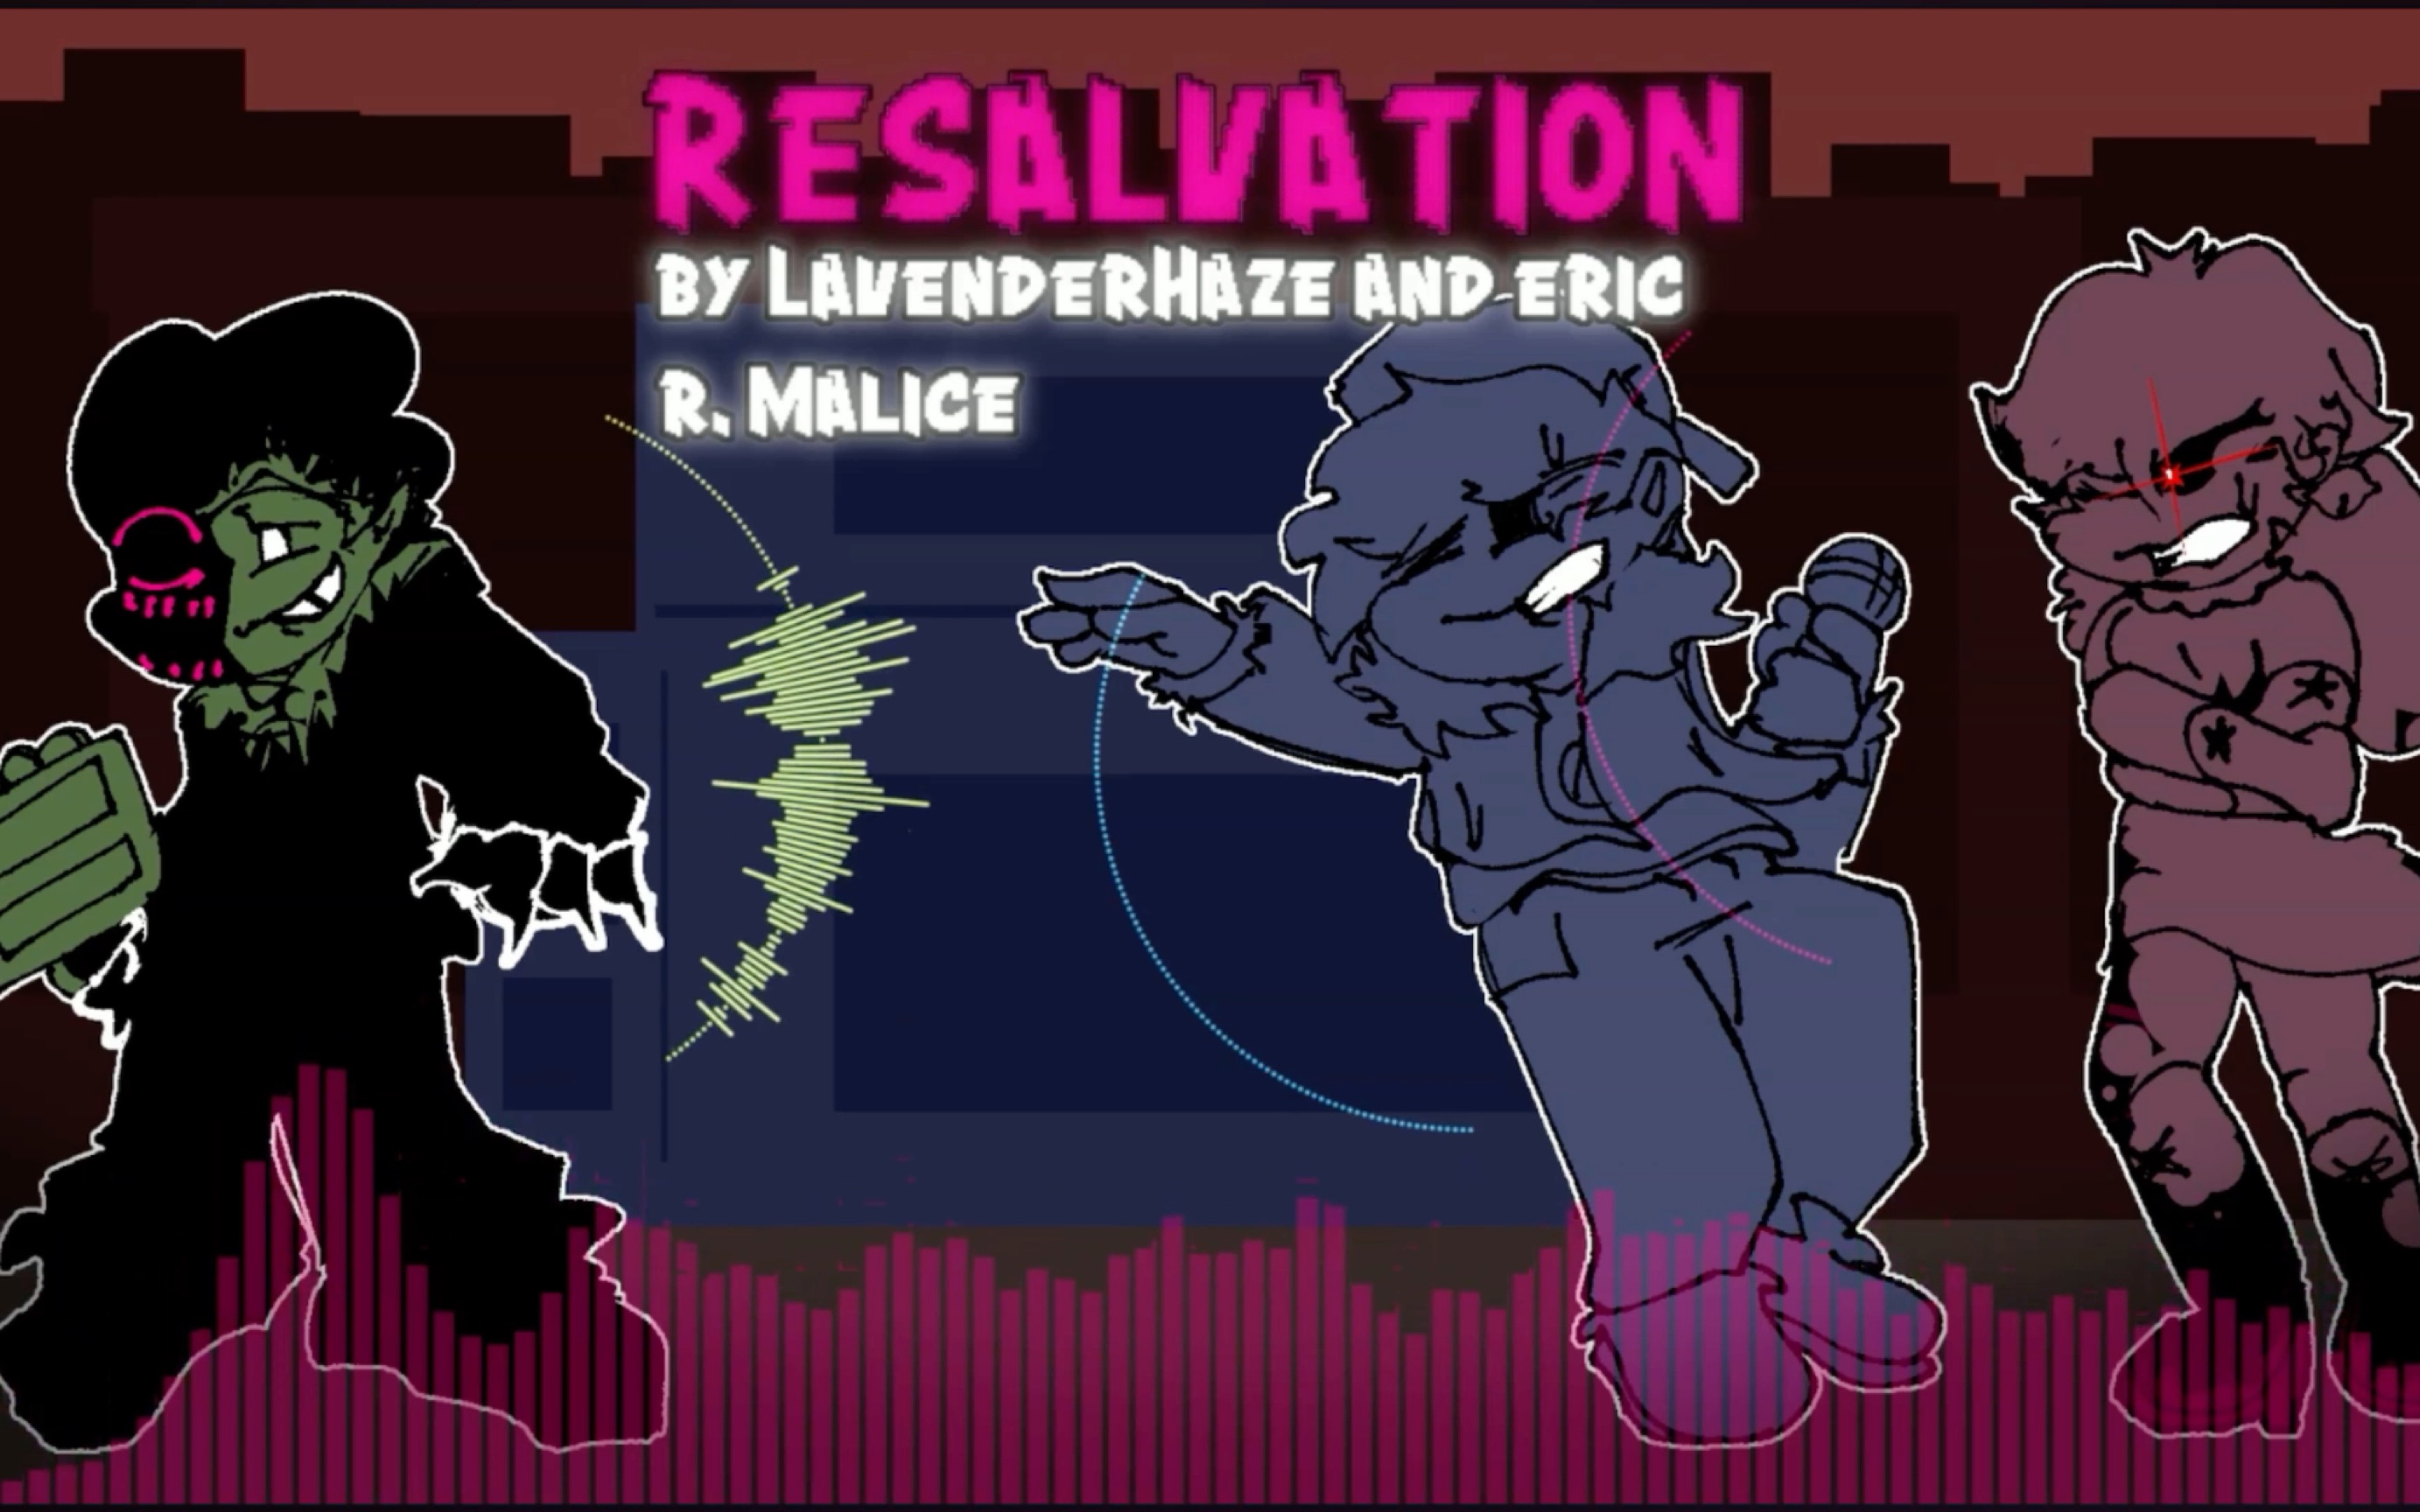 Resalvation/复生 || 放克腐化重构 FANMADE EXTRICATION REWORK UST (ft. Eric R. Malice)